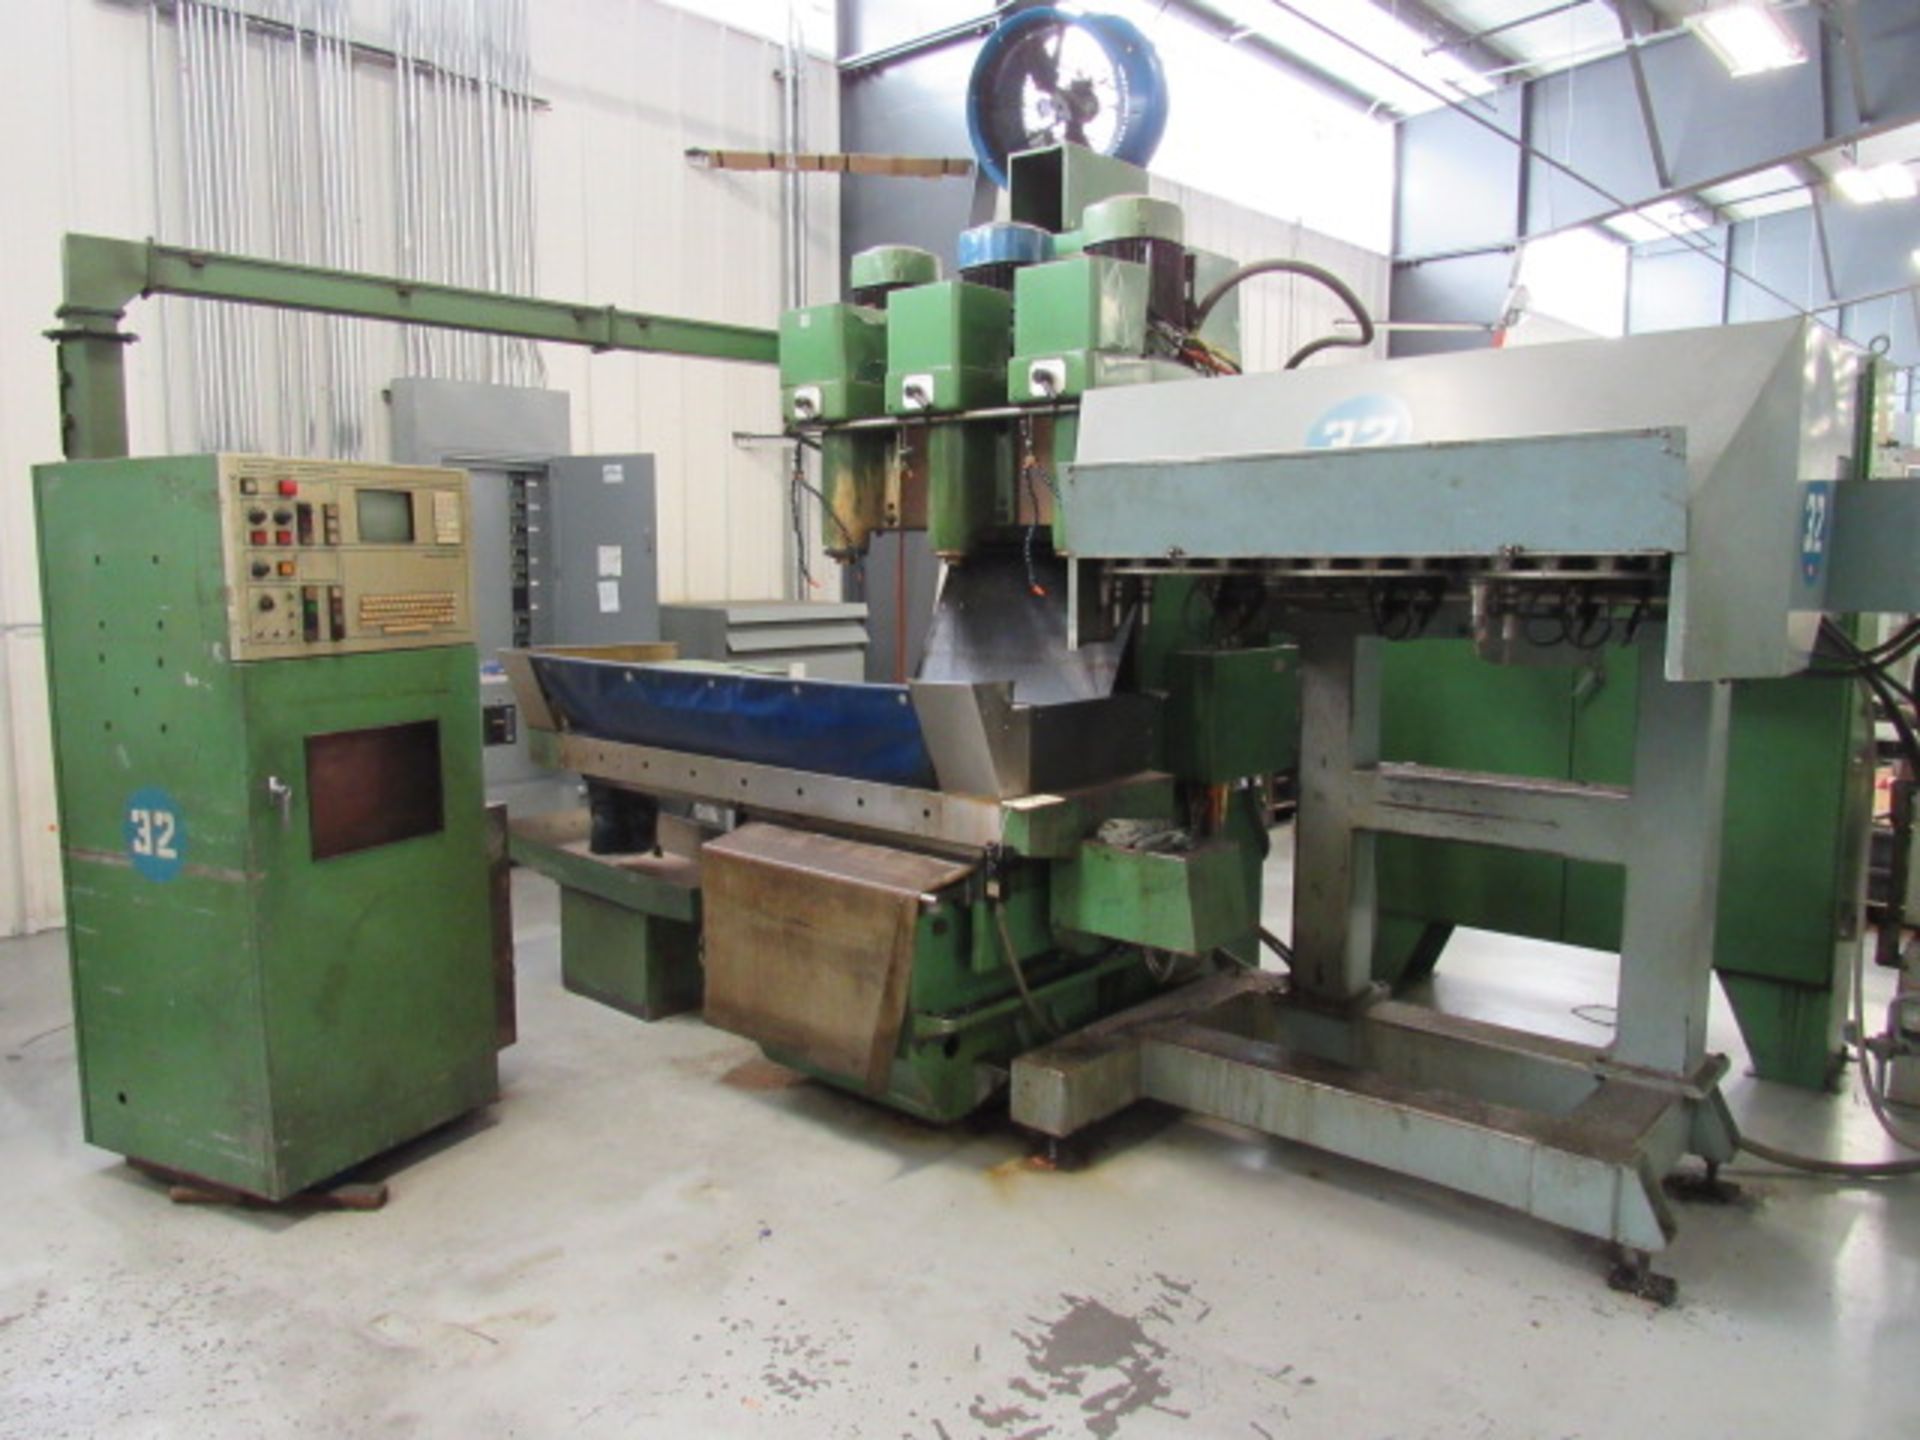 Bostomatic 3 Spindle CNC Mill